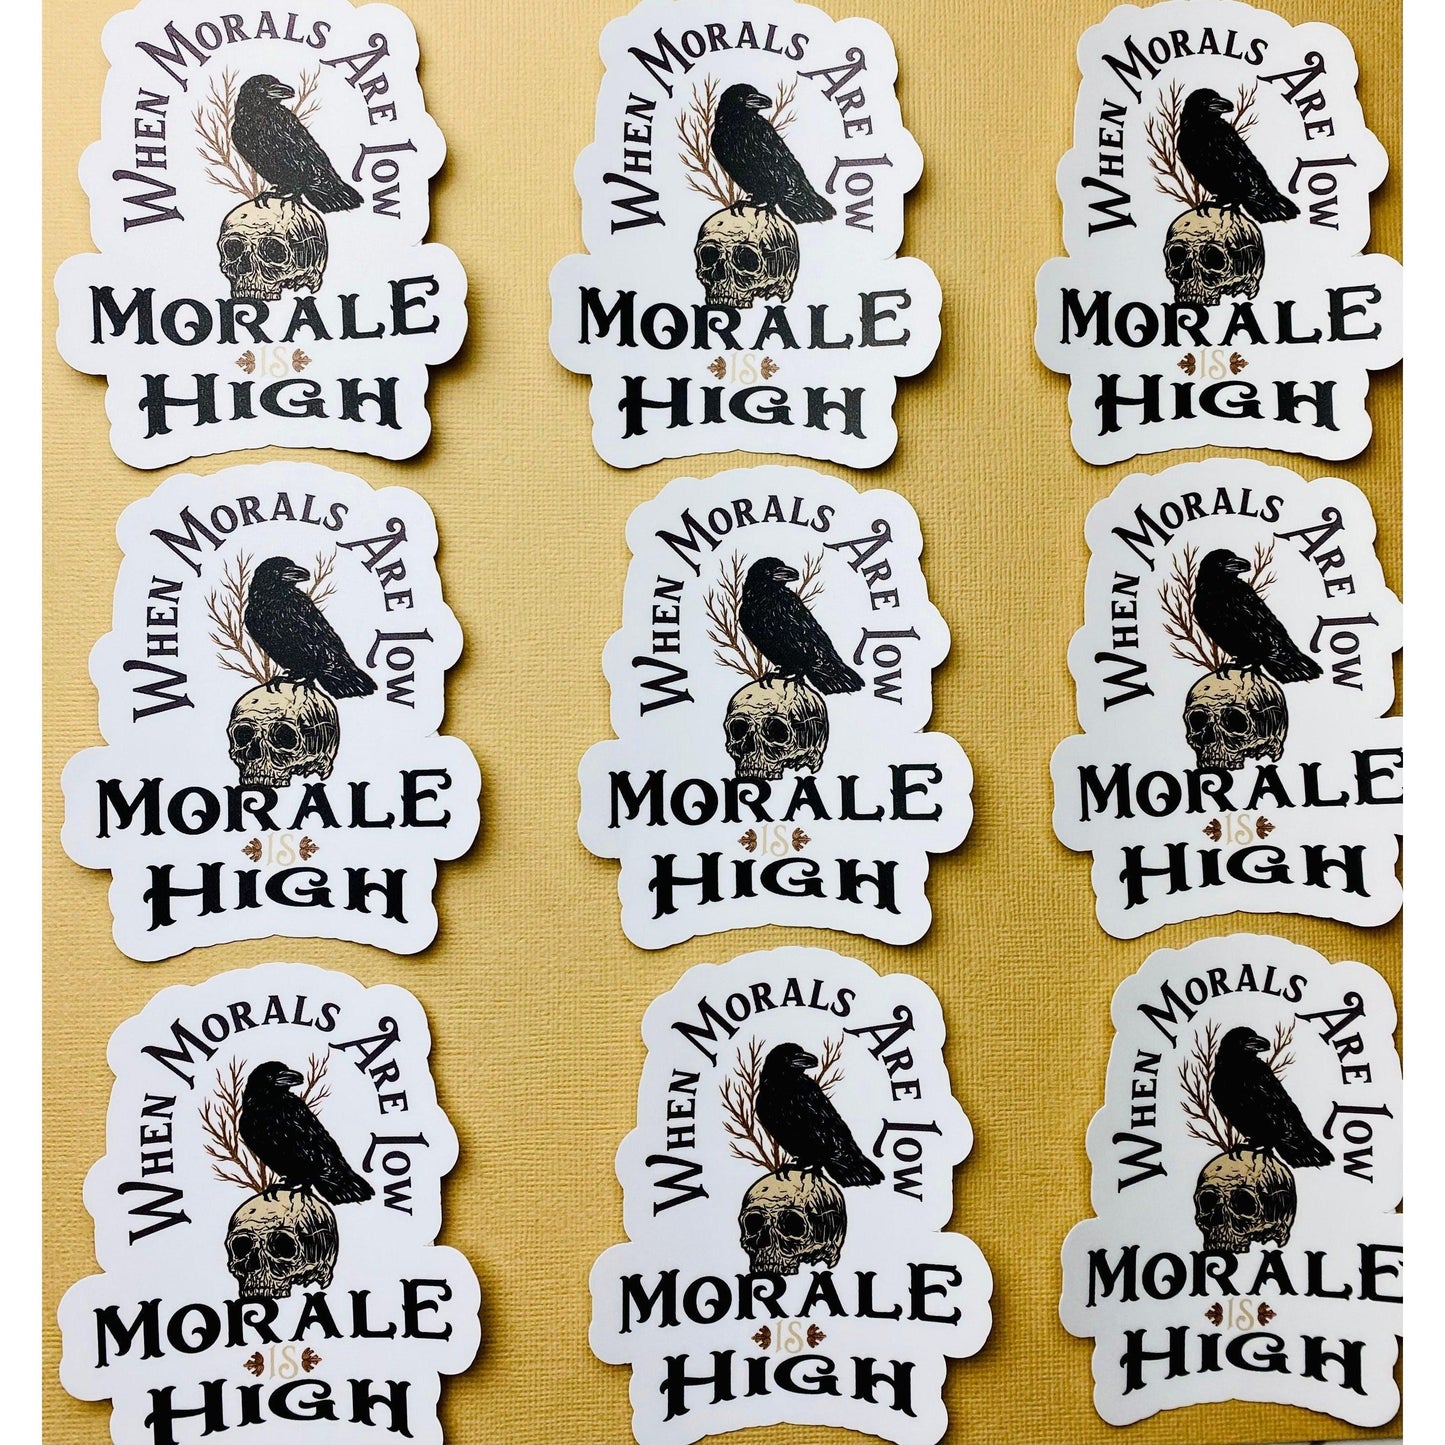 Morals Are Low, Morale is High Sticker for Police K9 Handler, Military K9, Army, K9 Unit, Law Enforcement - Ottos Grotto :: Stickers For Your Stuff